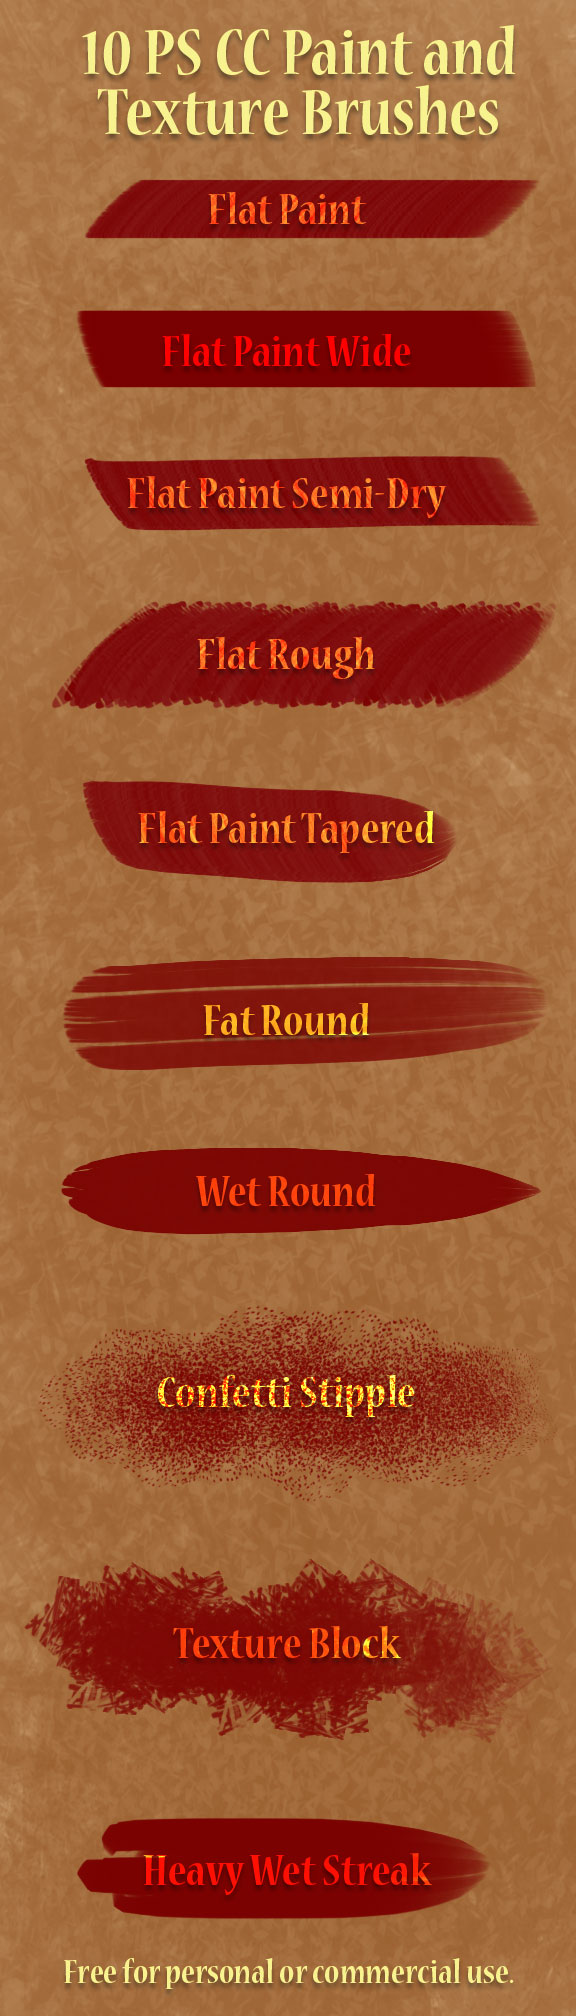 10 Paint and Texture Brushes